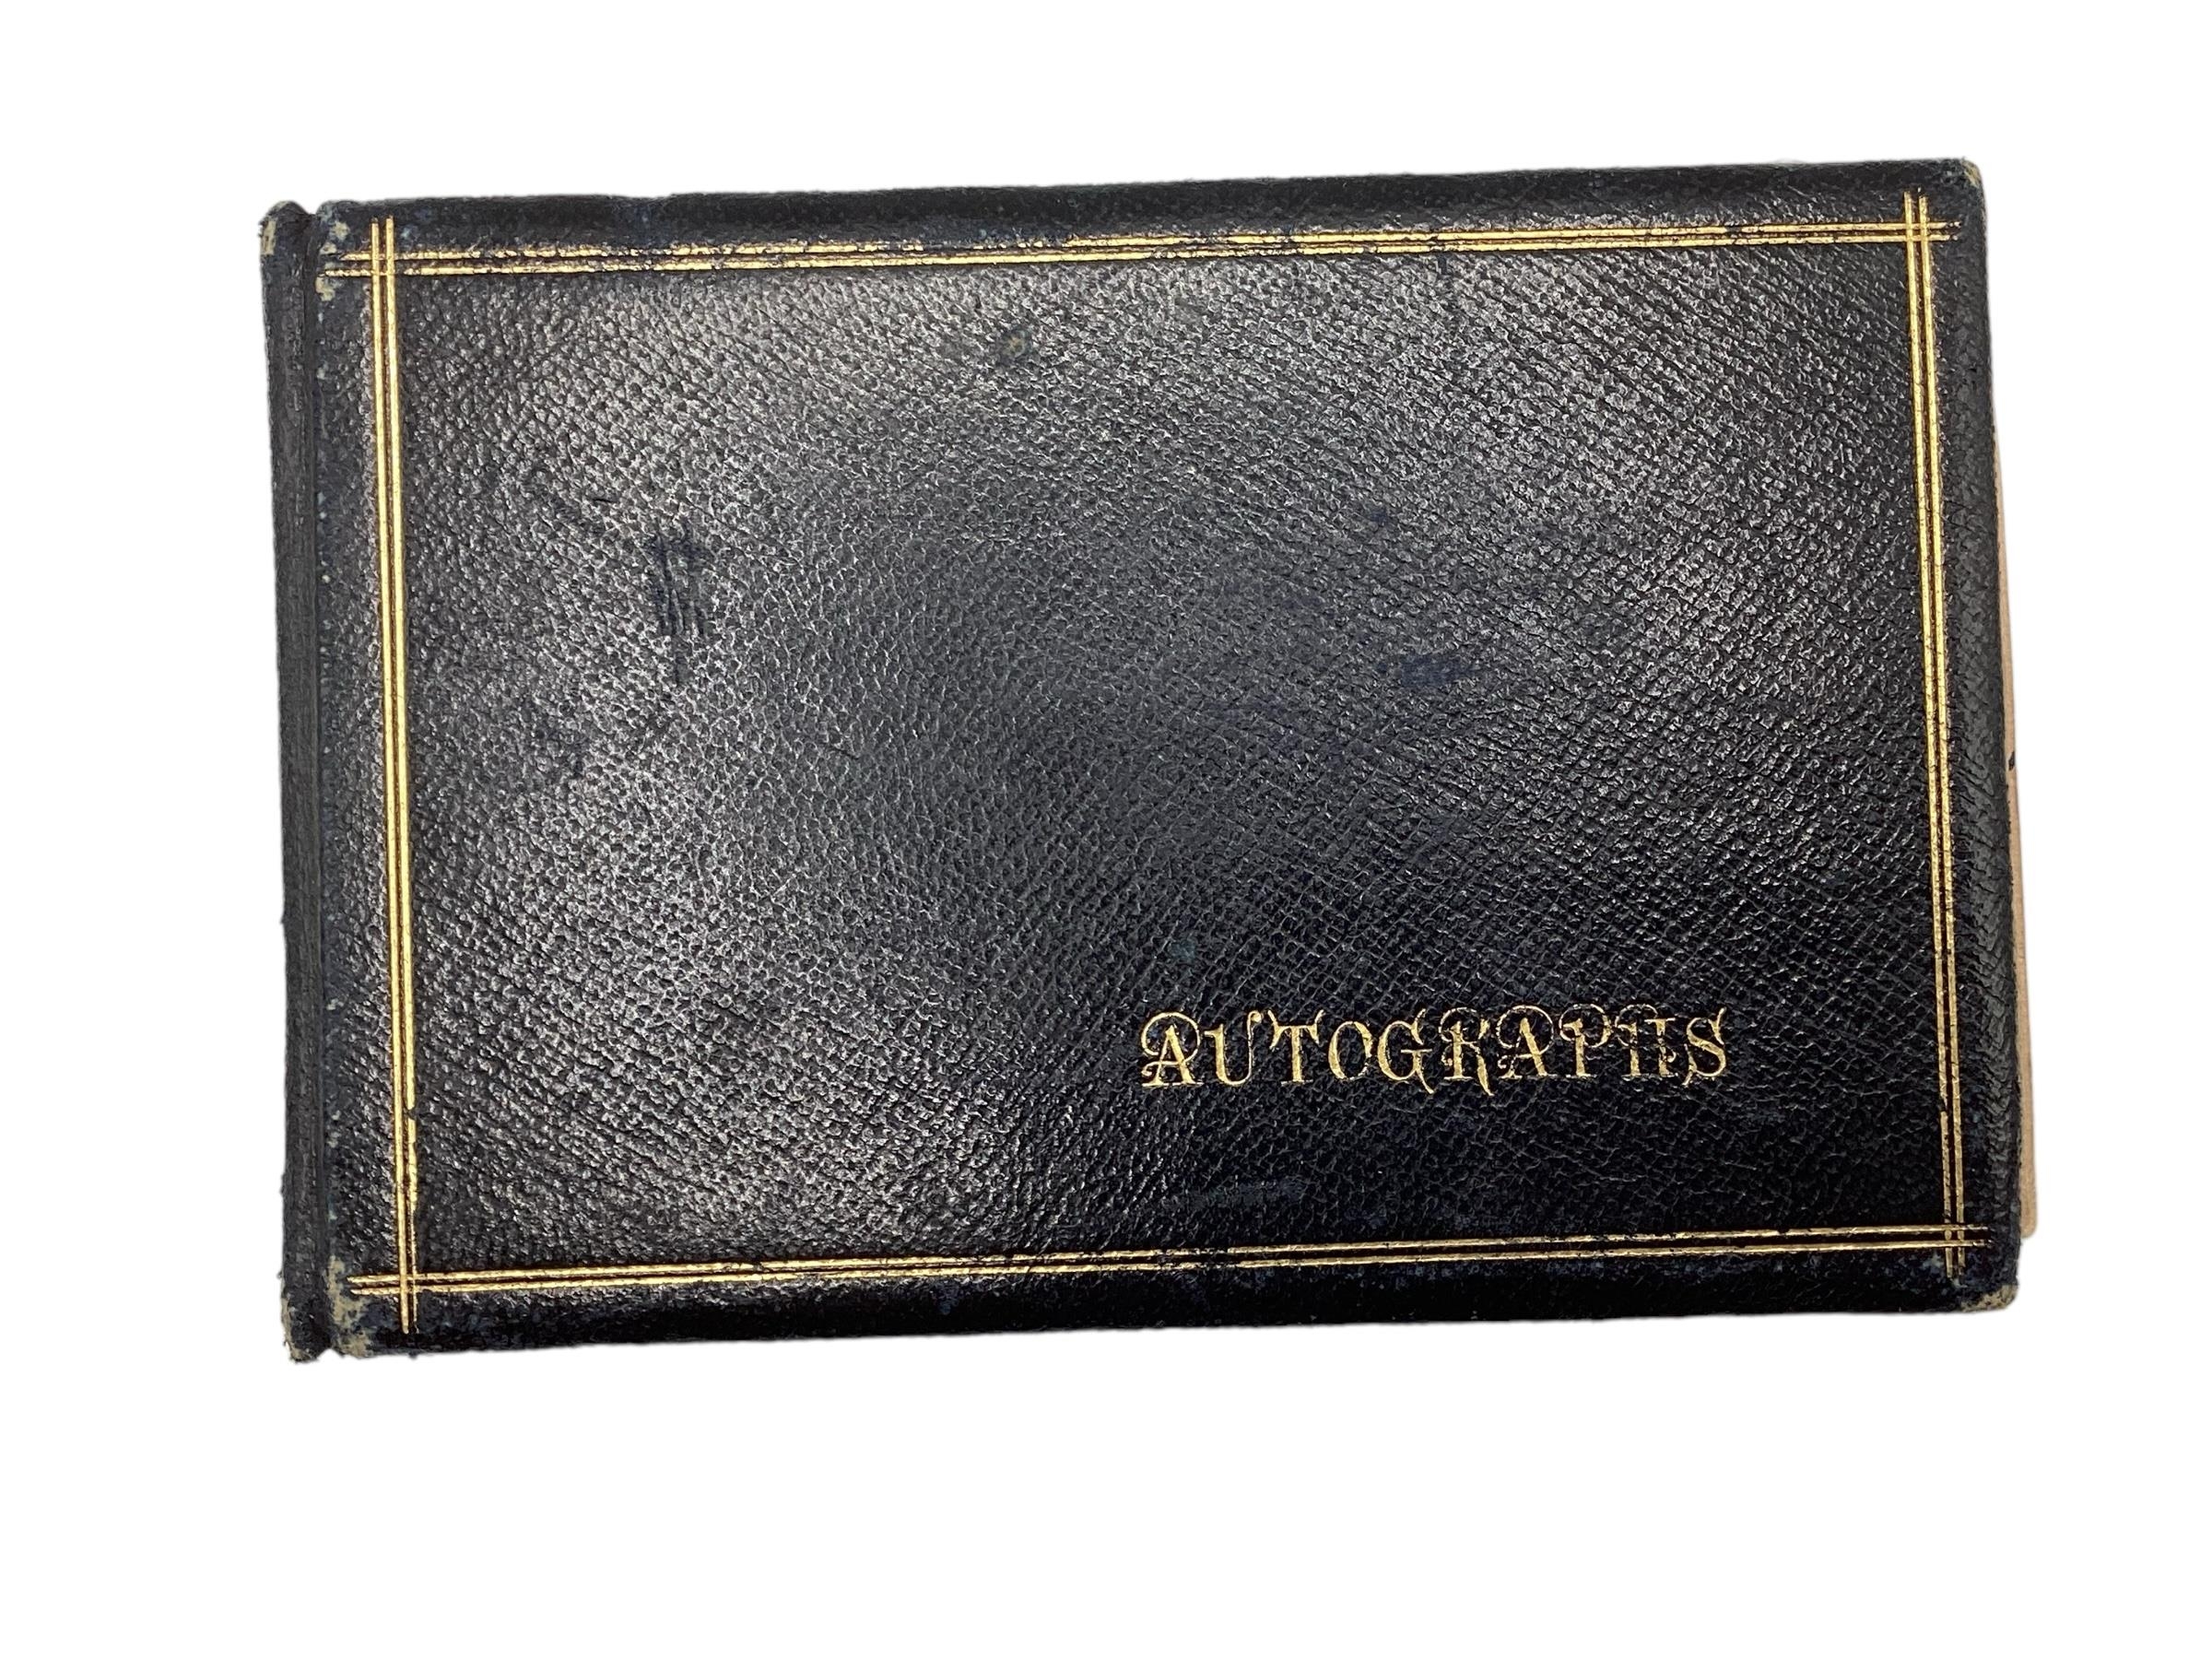 An Autograph book. see images for names